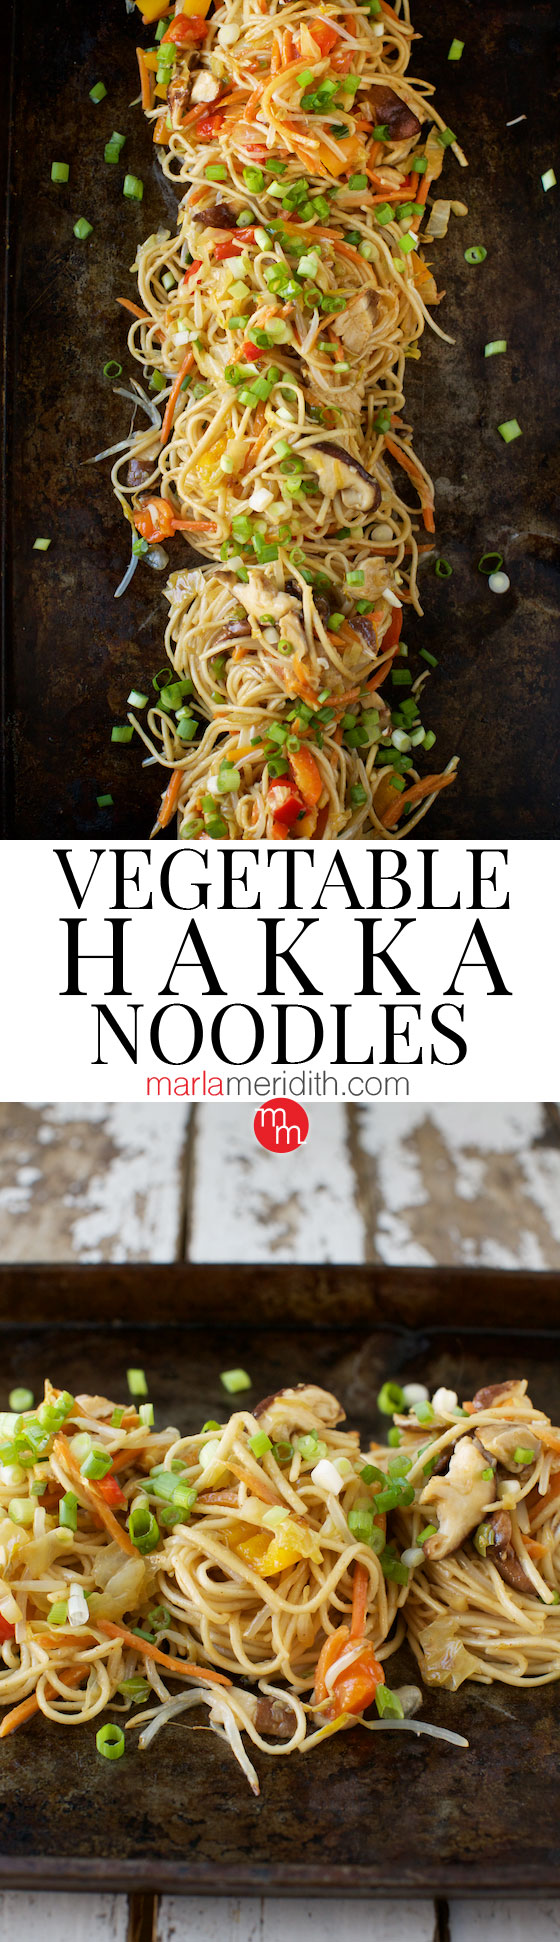 Vegetable Hakka Noodles recipe inspired from a @Carnival Cruise on MarlaMeridith.com ( @marlameridith ) #carnivalpartner